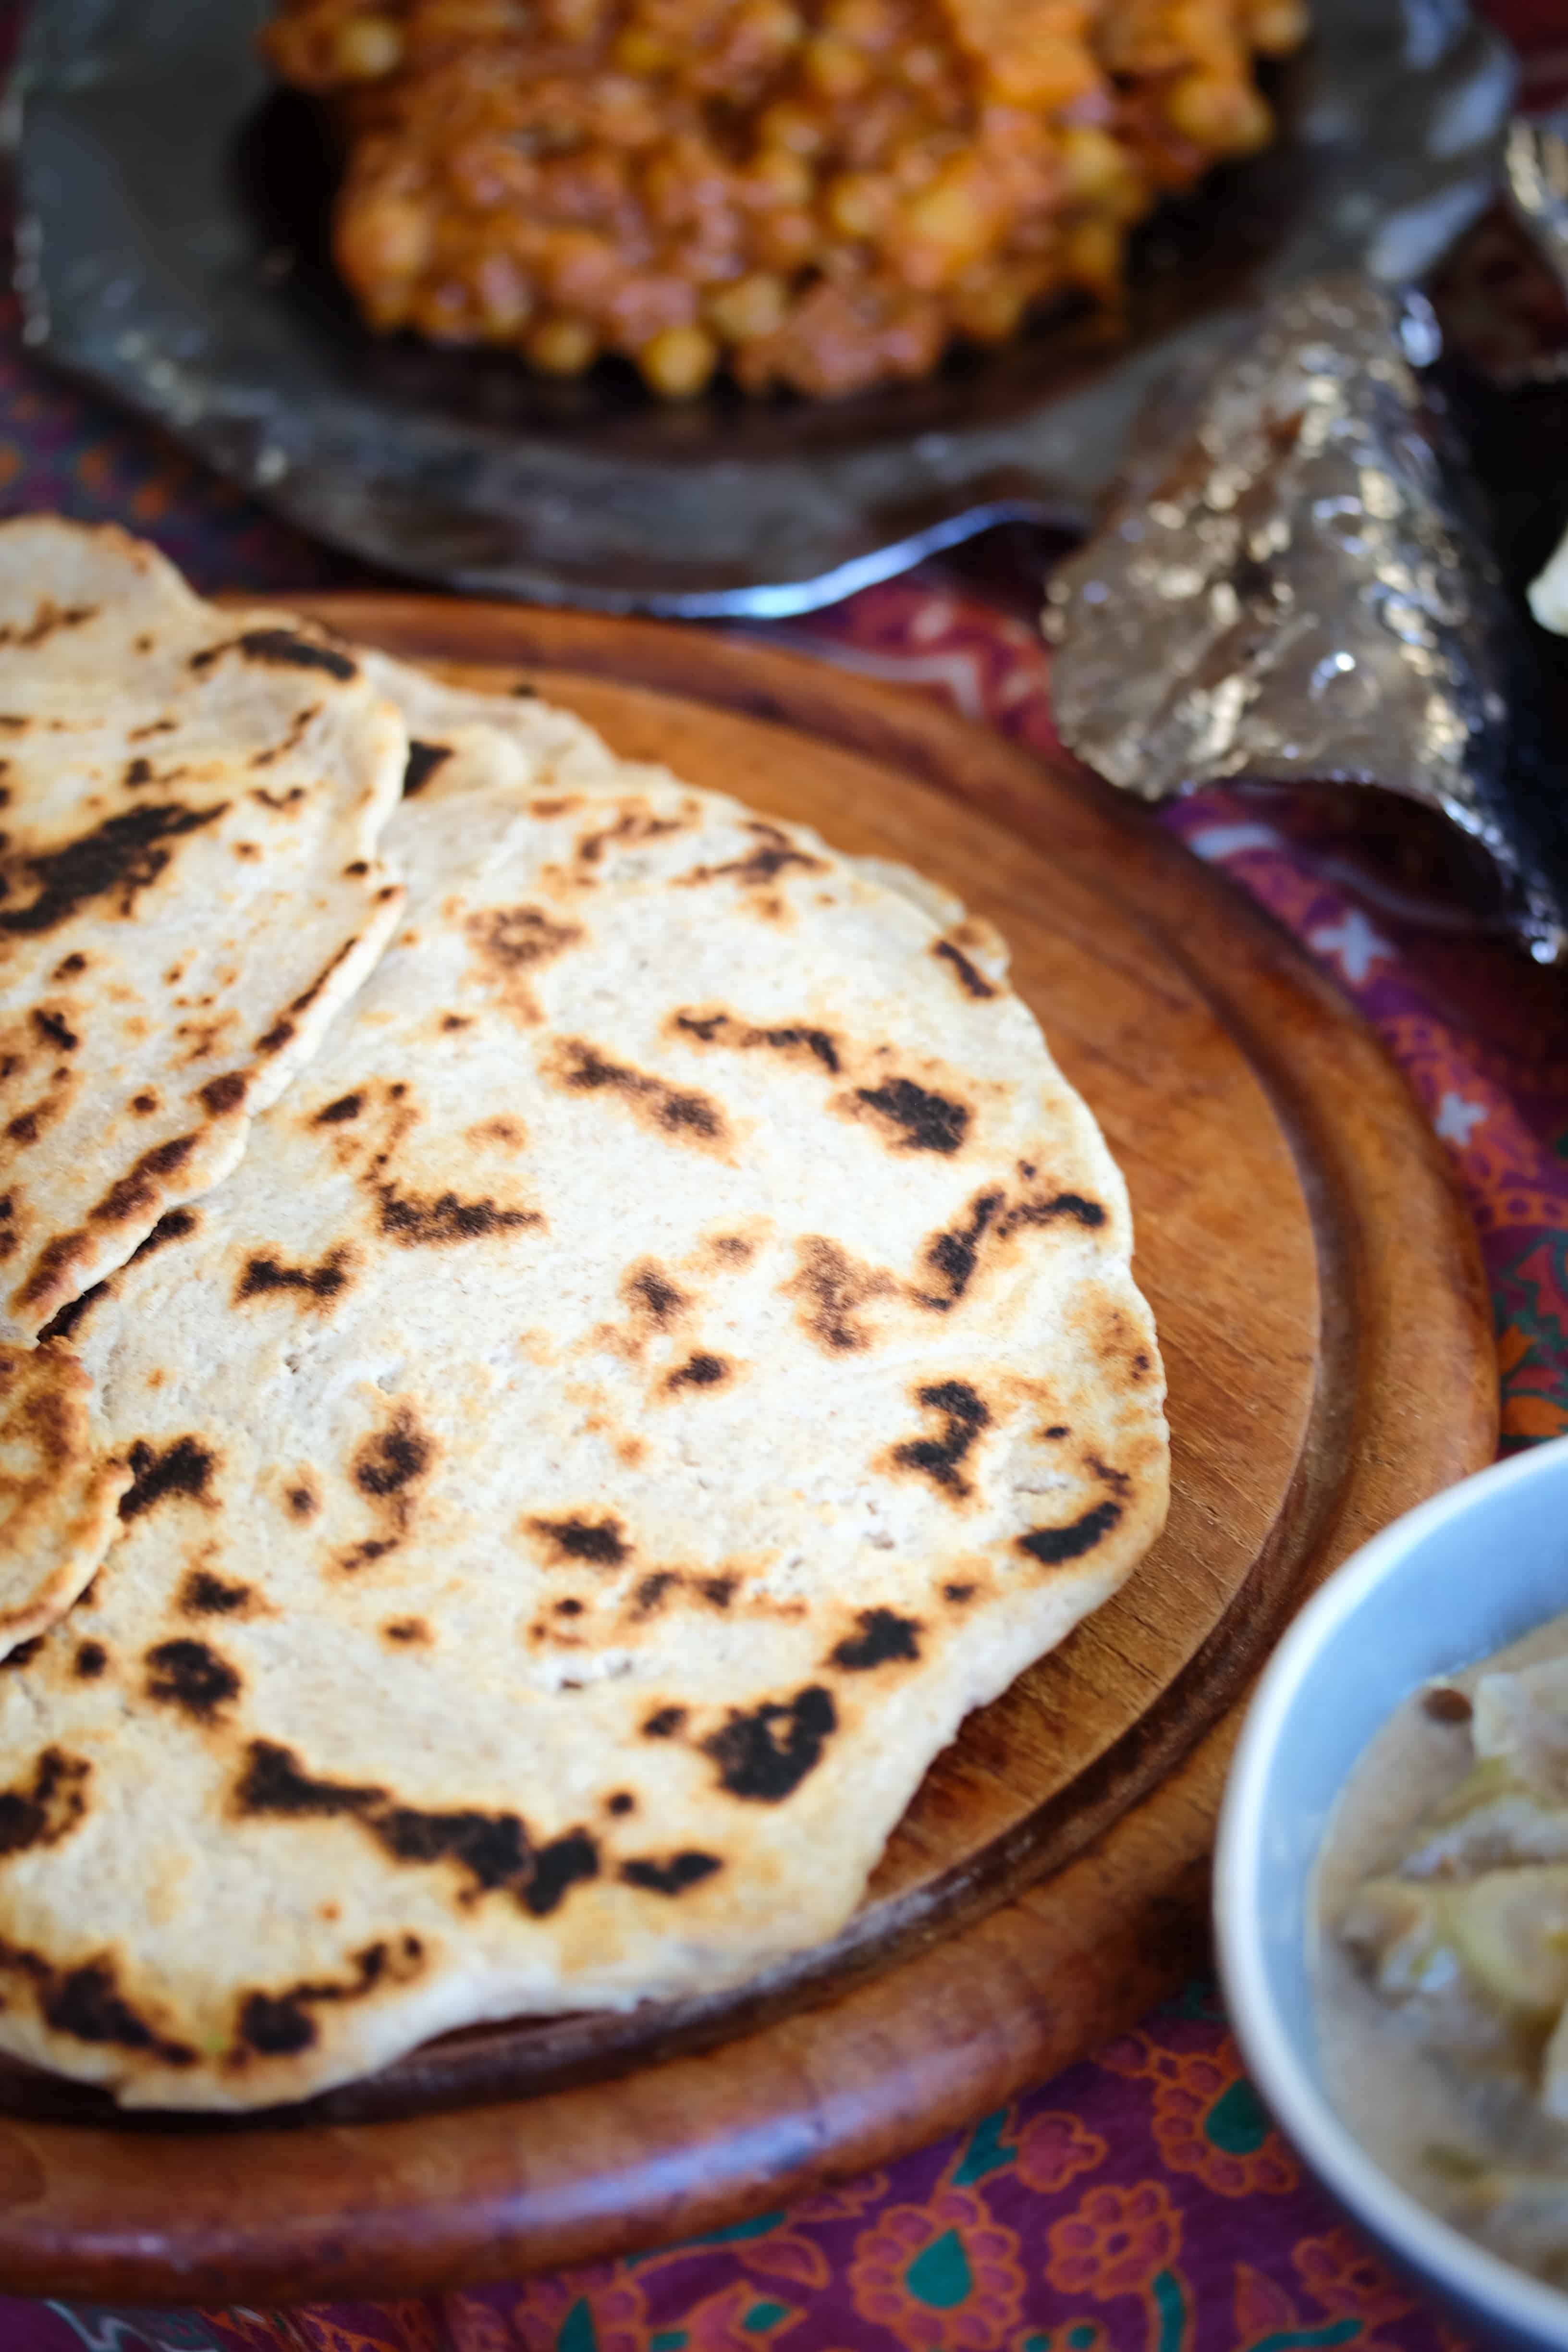 Indian Naan Bread "What you all have been waiting for" - True Foods Blog